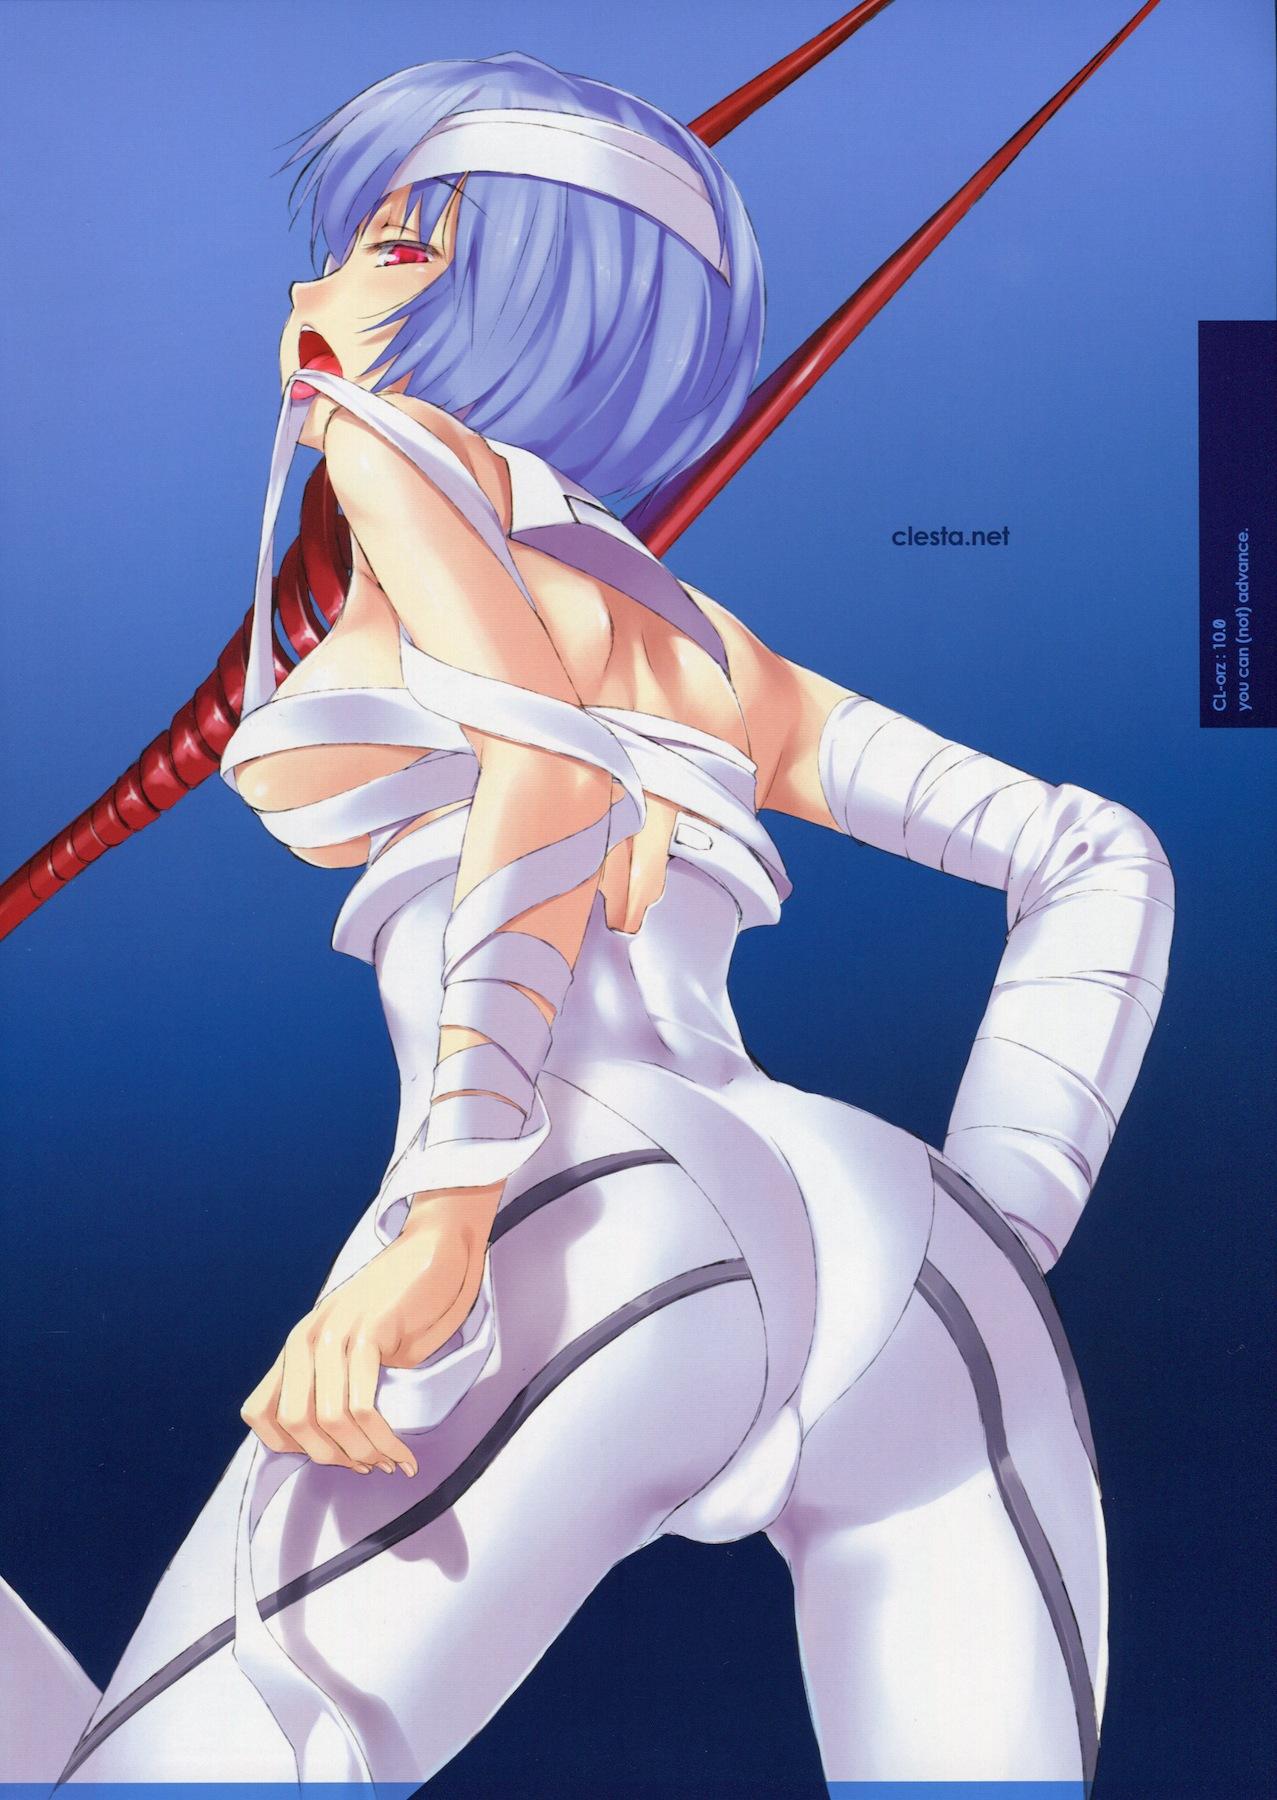 (SC48) [Clesta (Cle Masahiro)] CL-orz: 10.0 - you can (not) advance (Rebuild of Evangelion) [English] {doujin-moe.us} [Decensored] 15